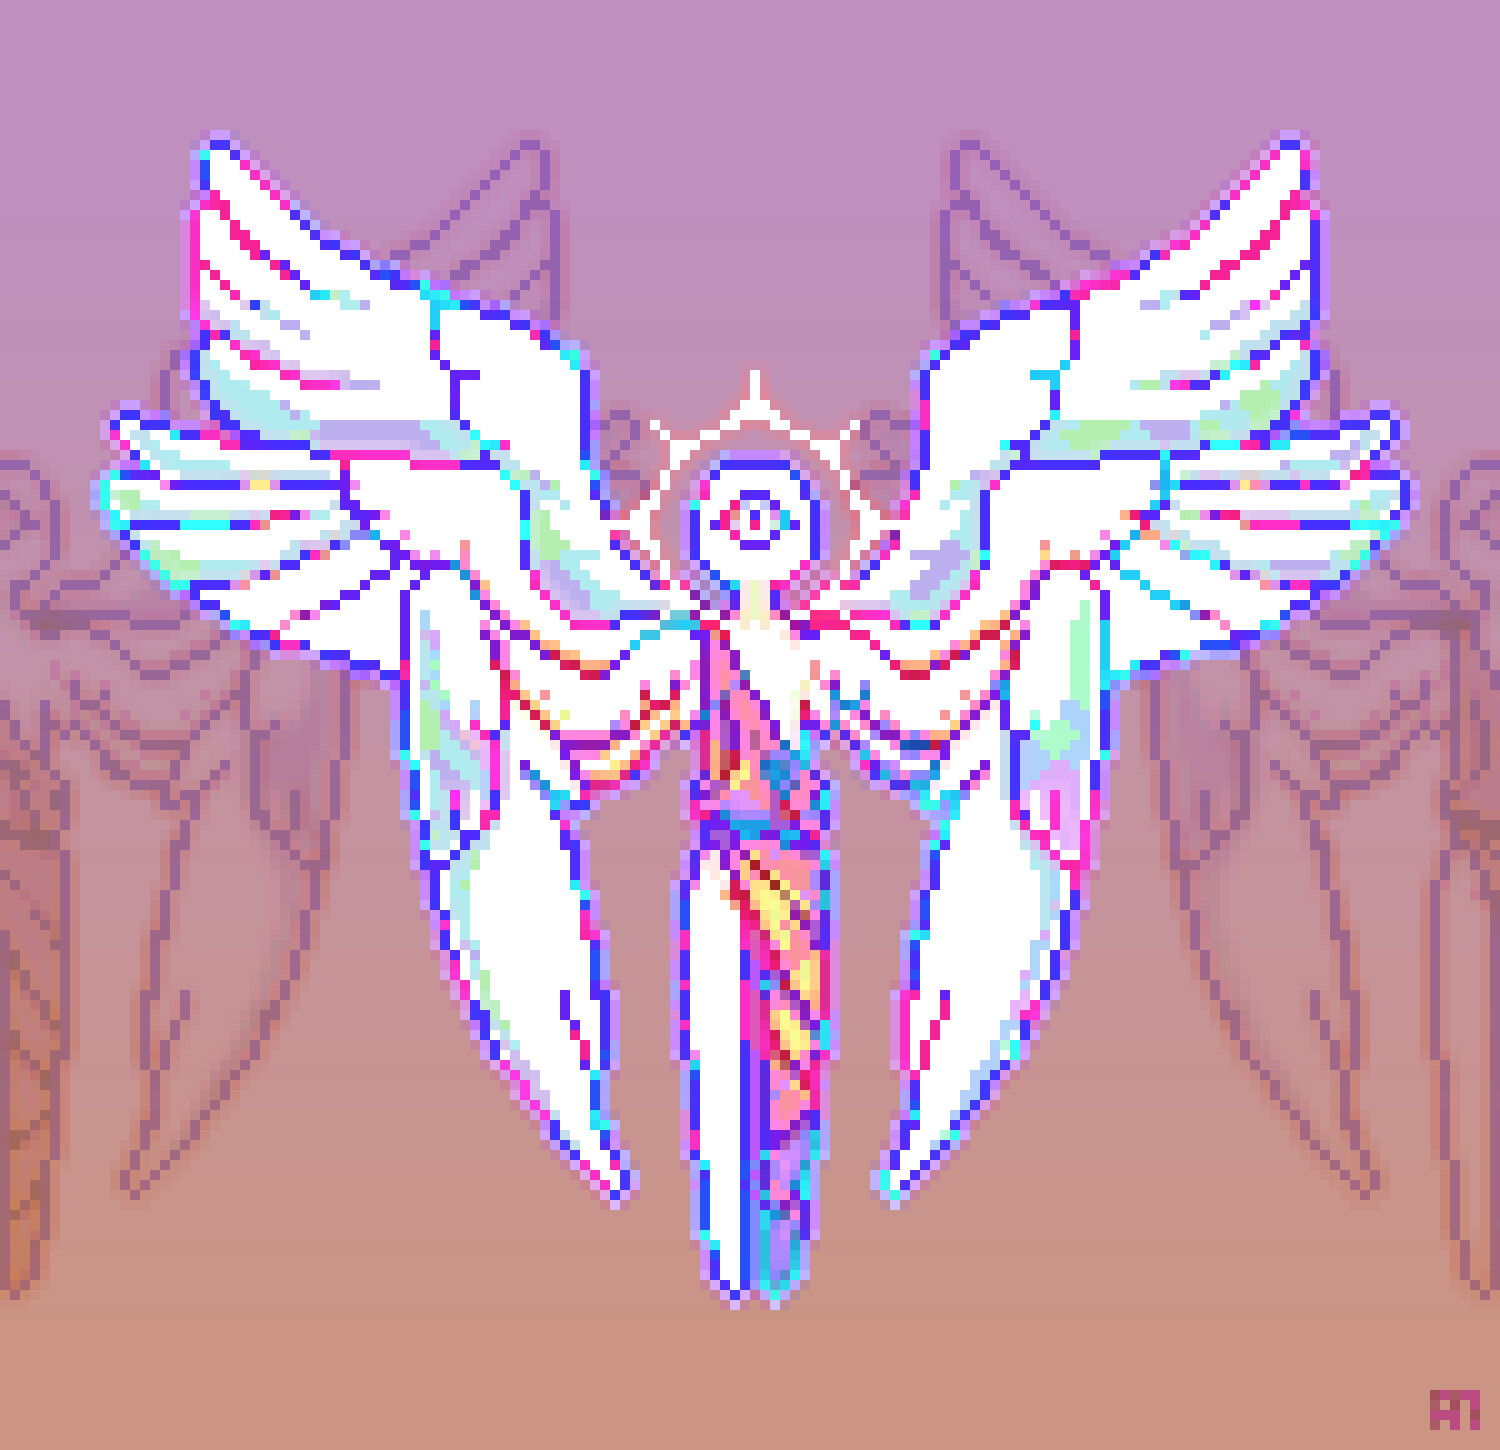 A bright and saturated angel for the prompt 'colorful'.